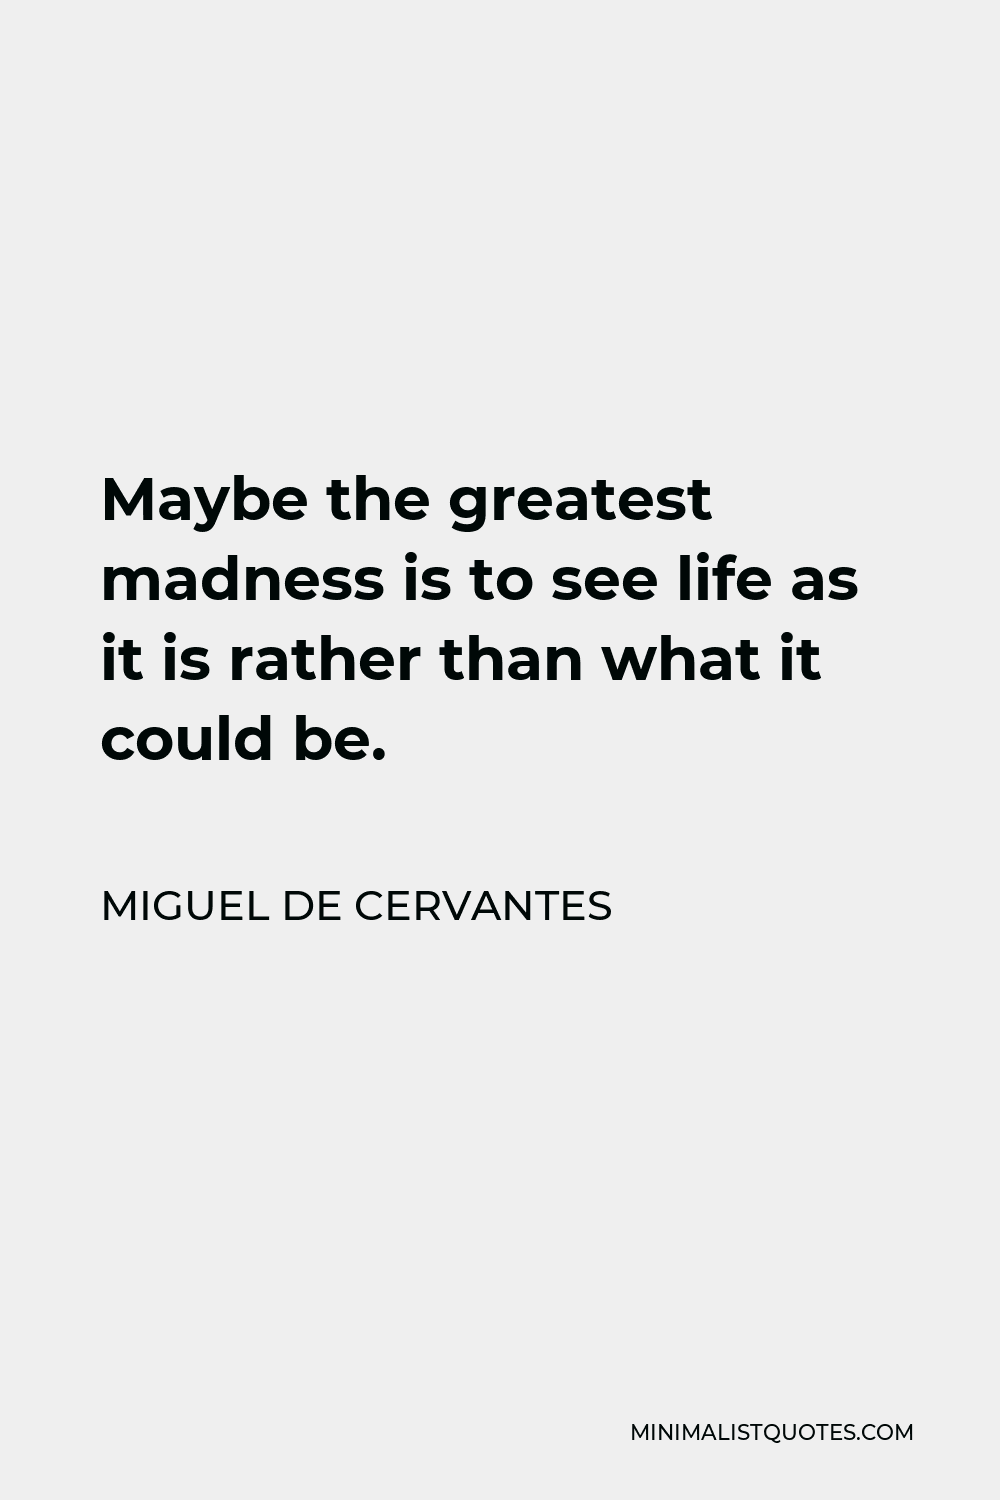 Miguel de Cervantes Quote - Maybe the greatest madness is to see life as it is rather than what it could be.